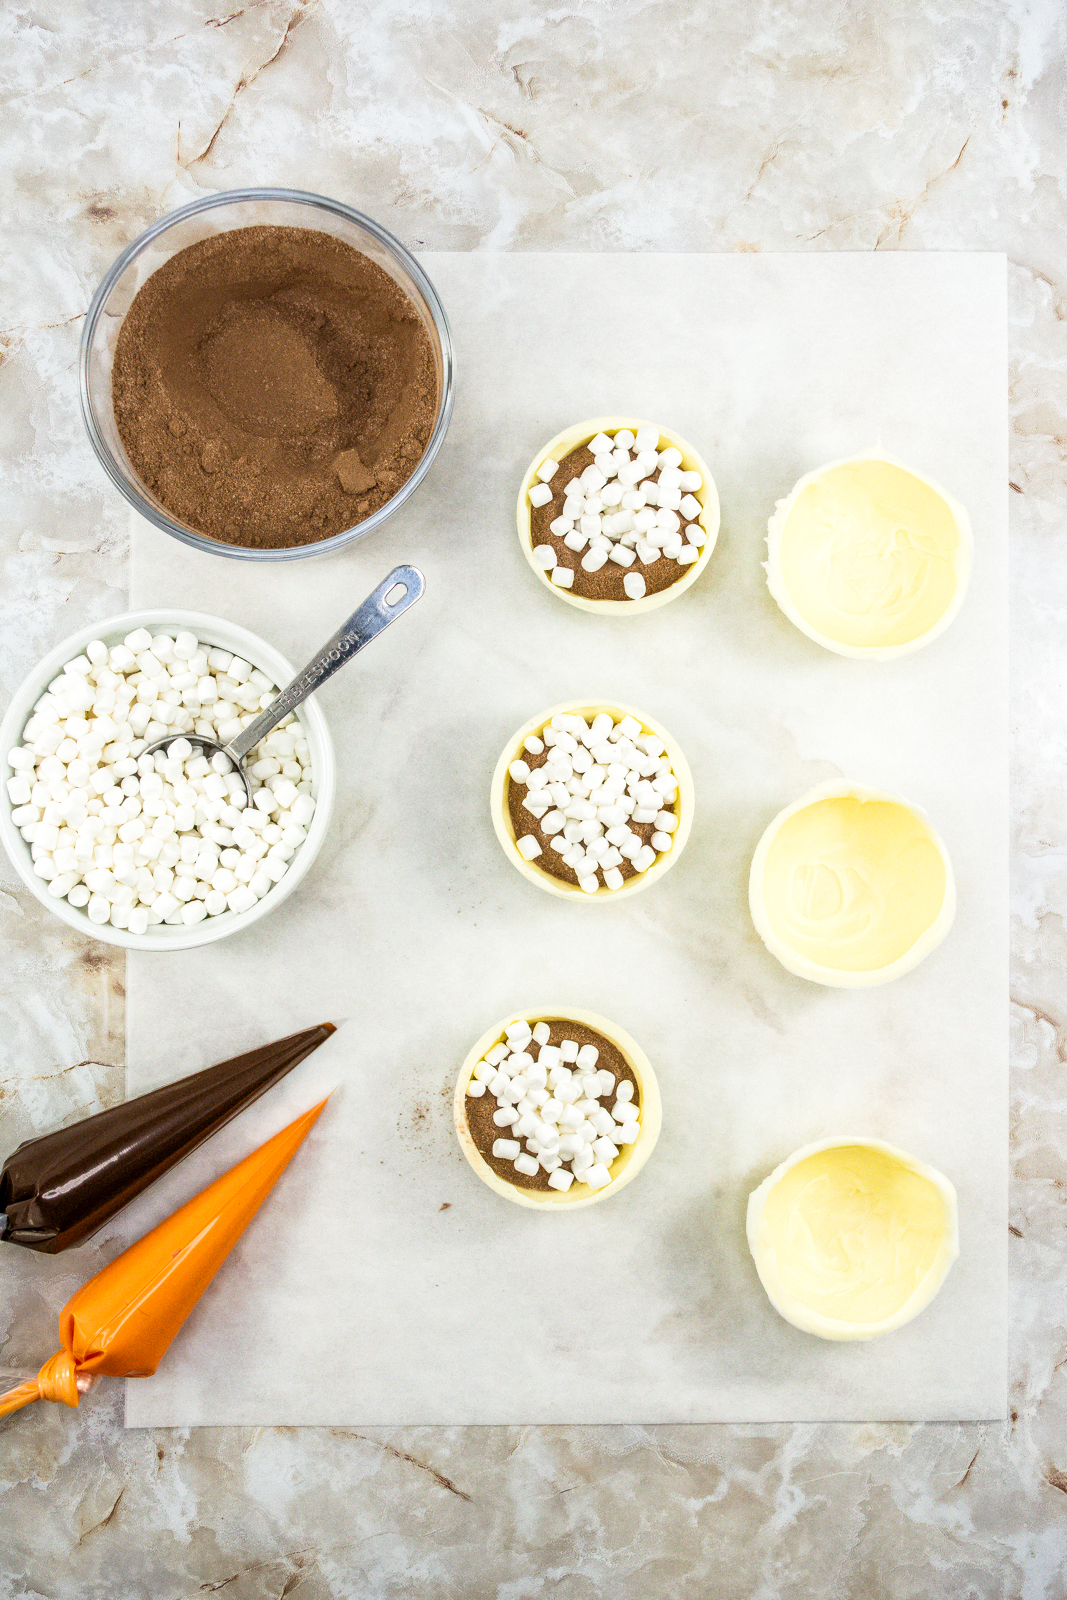 White chocolate spheres filled with hot chocolate mix and marshmallows.